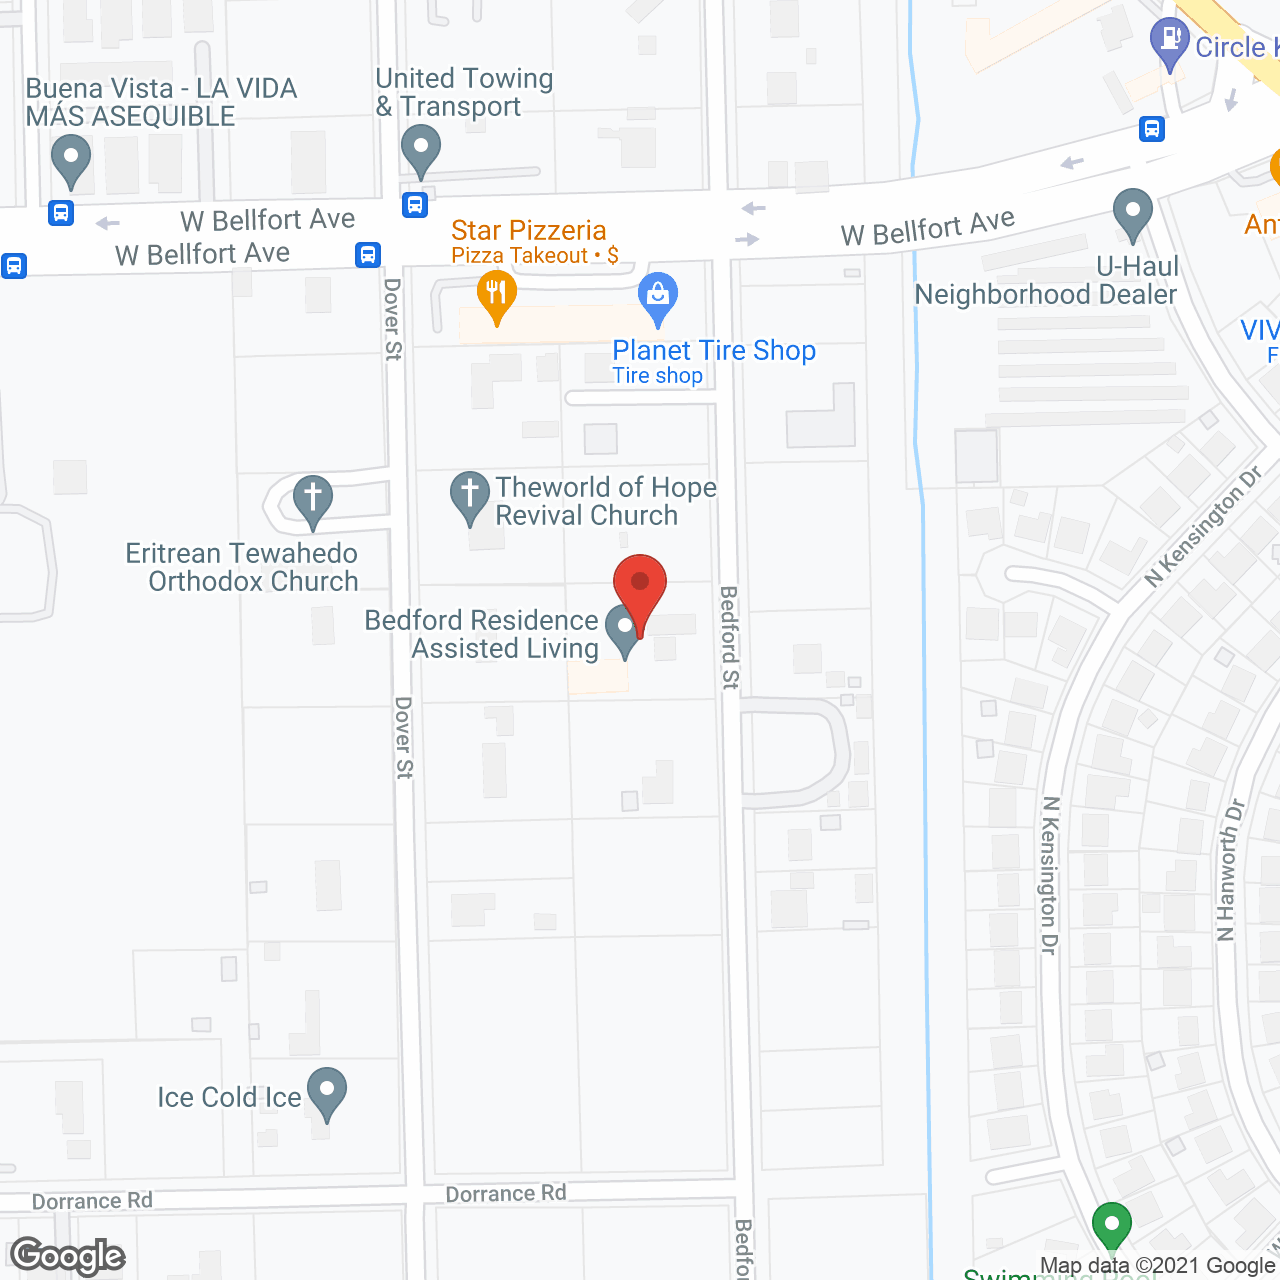 Bedford Residence Assisted Living in google map